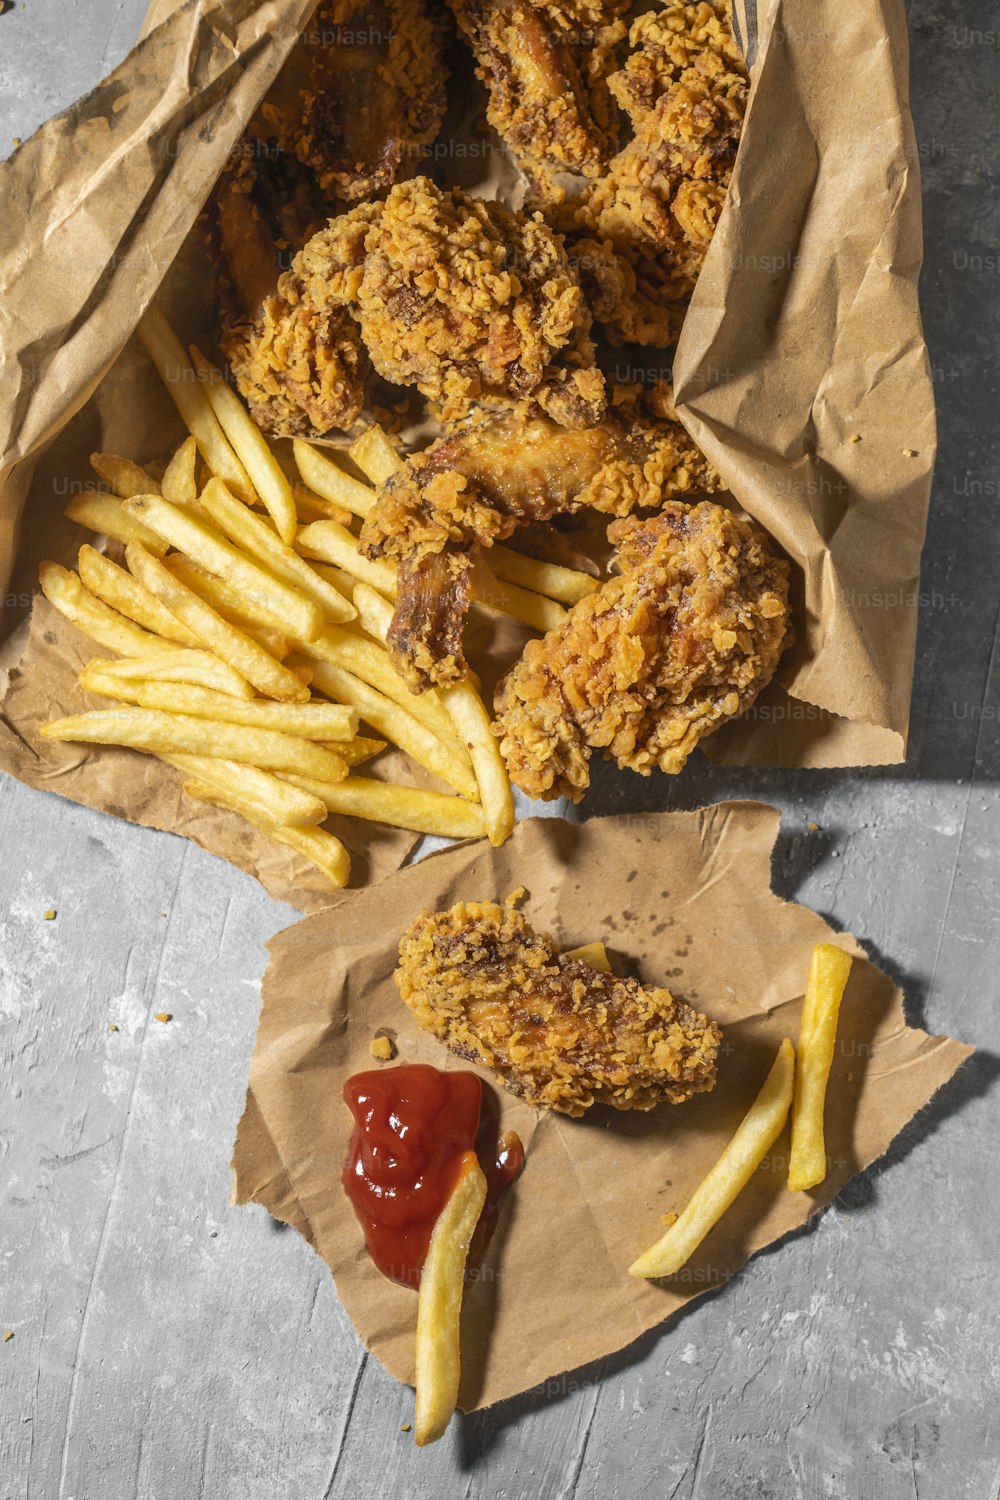 fried chicken and french fries with ketchup and ketchup